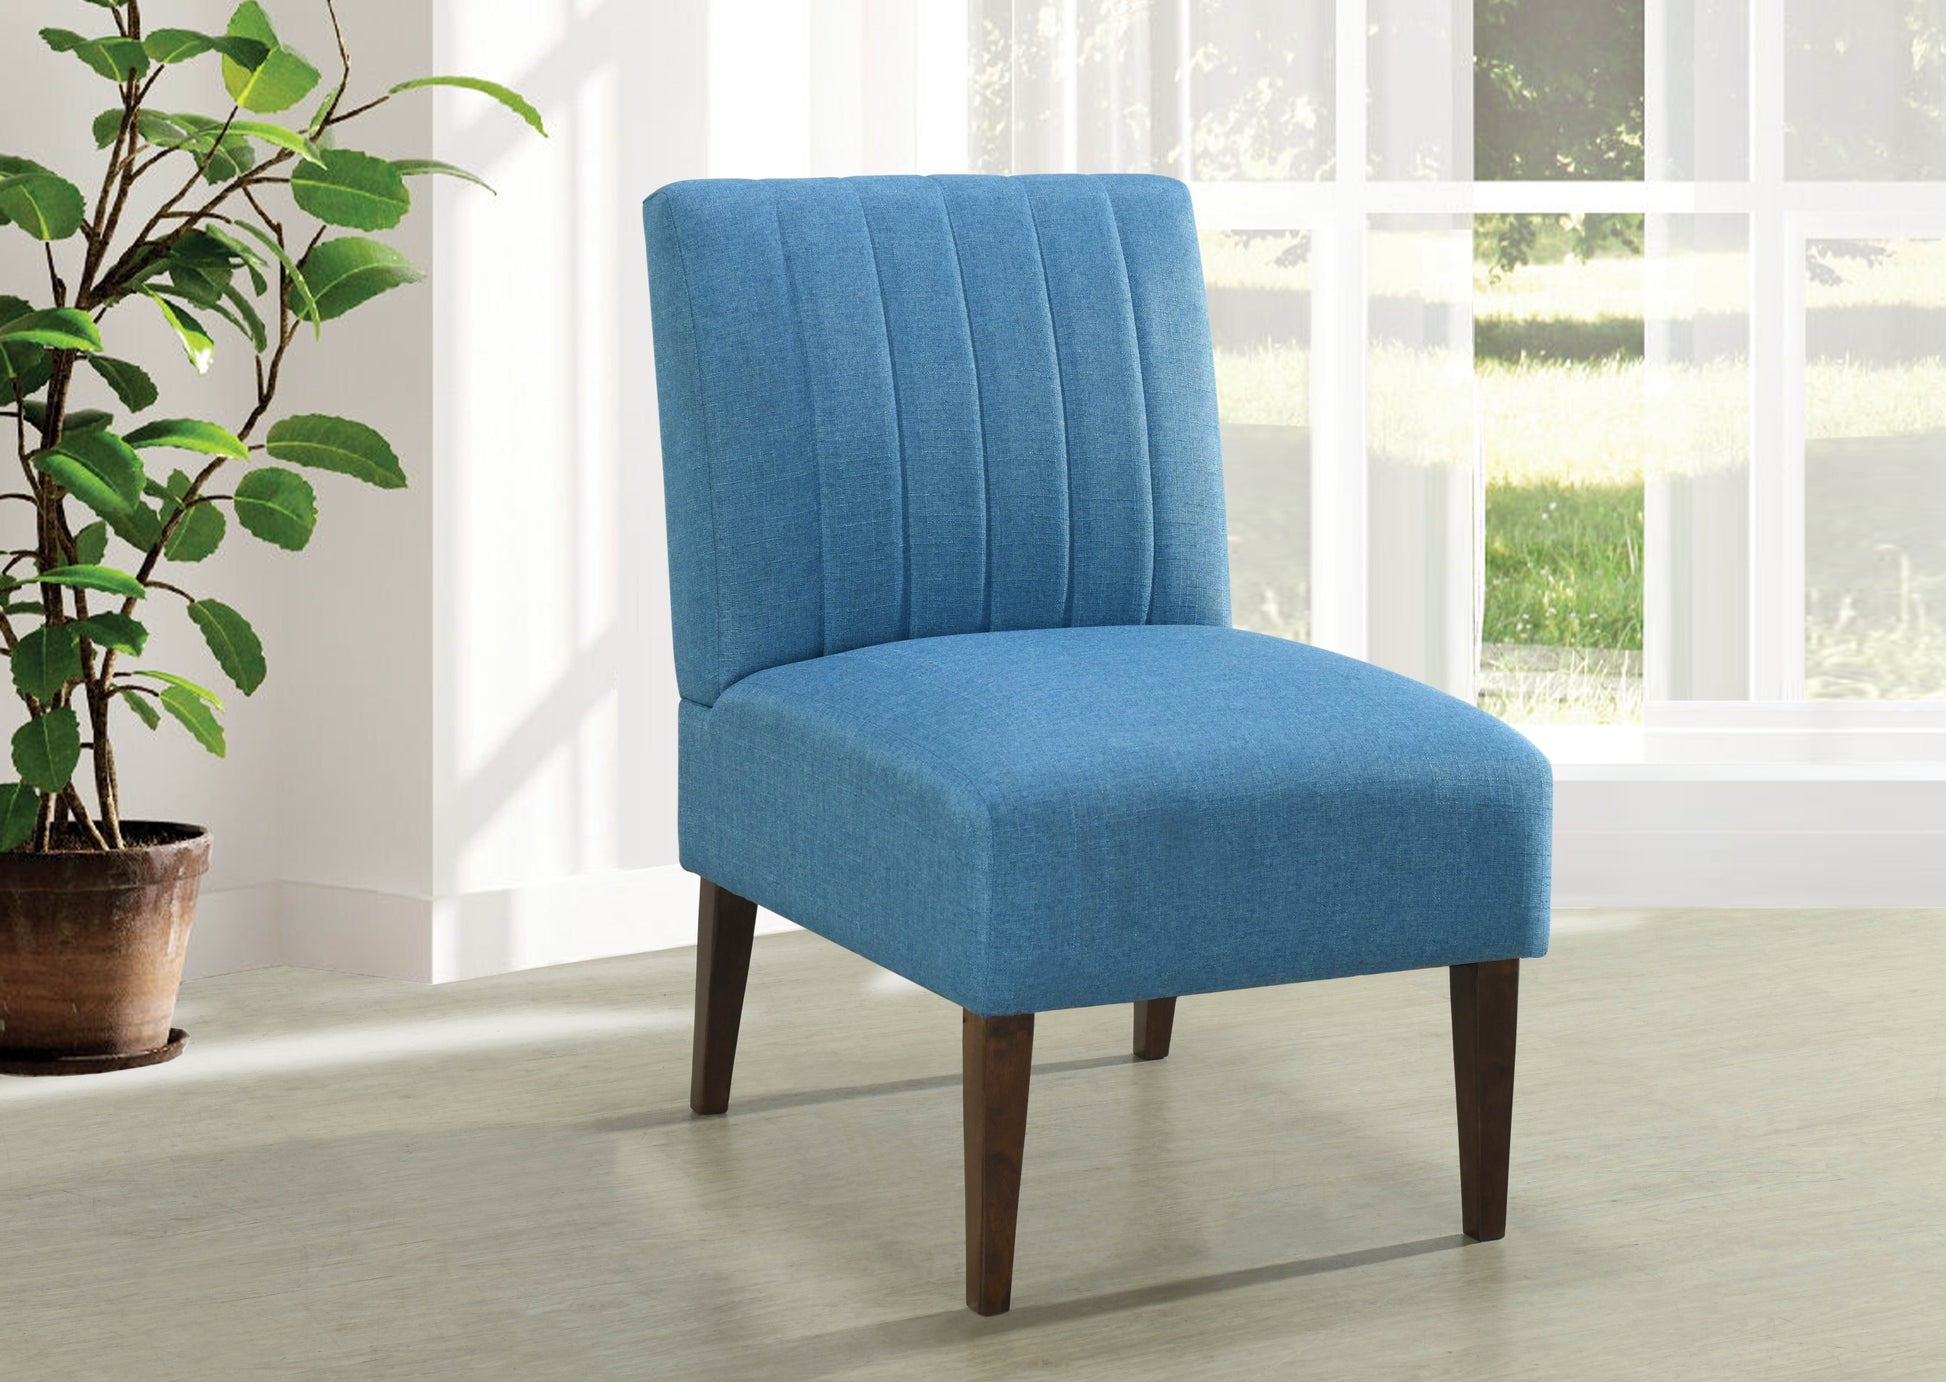 Stylish Comfortable Accent Chair 1pc Blue Fabric blue-primary living space-wood